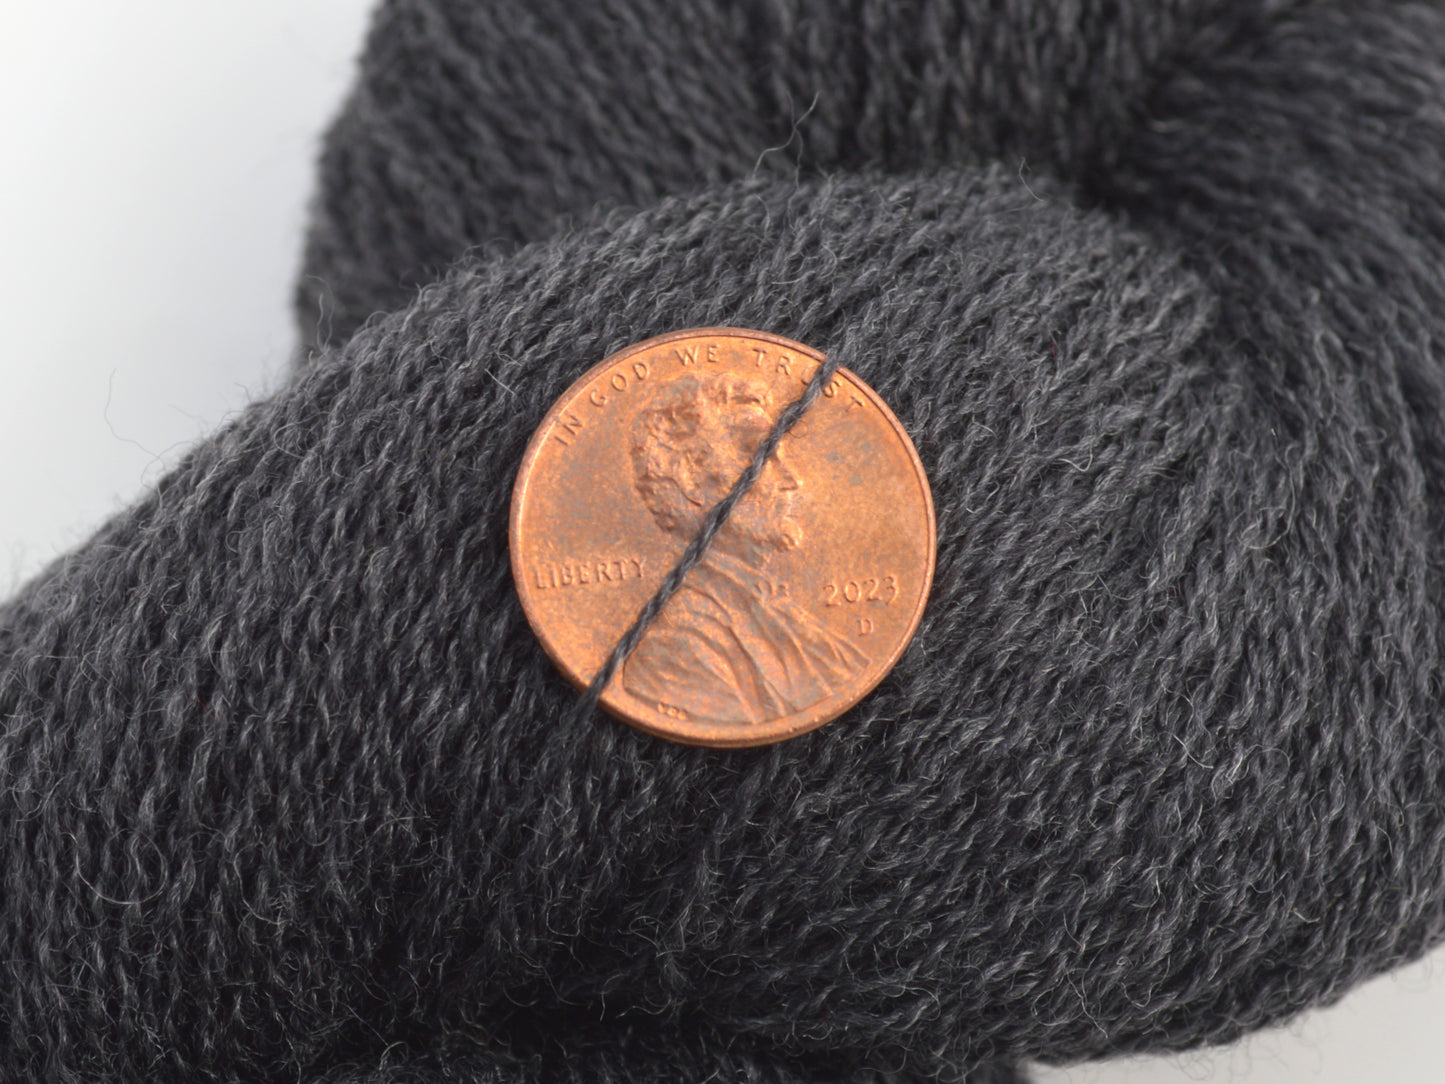 Lace Weight Merino Wool Recycled Yarn in Charcoal Gray